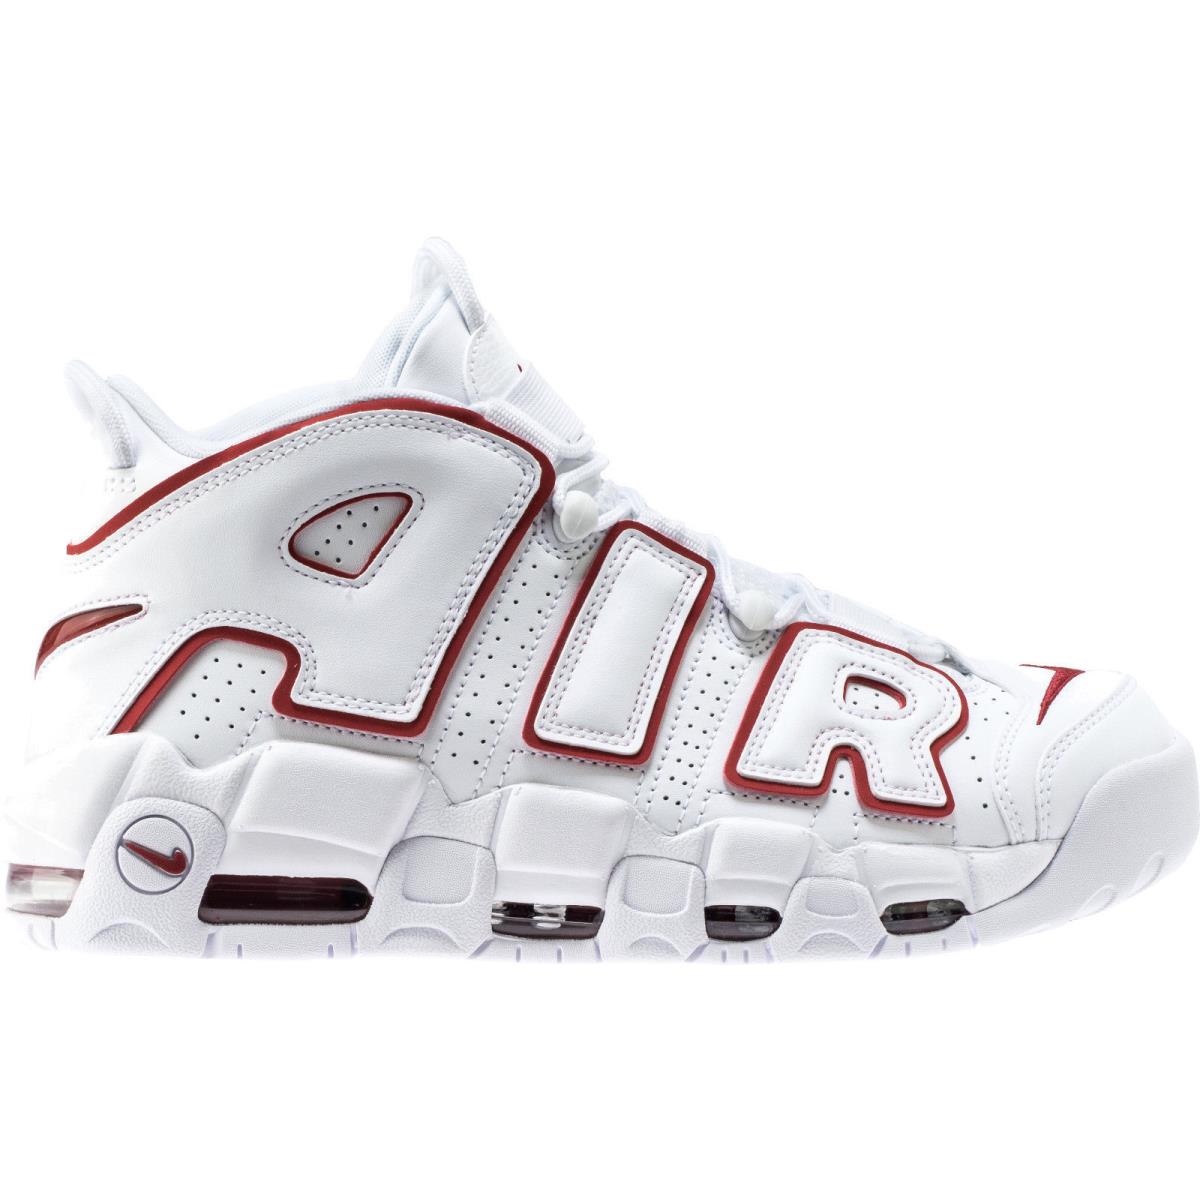 Nike Air More Uptempo 96 White Varsity Red Size 14. 921948-102 Pippen